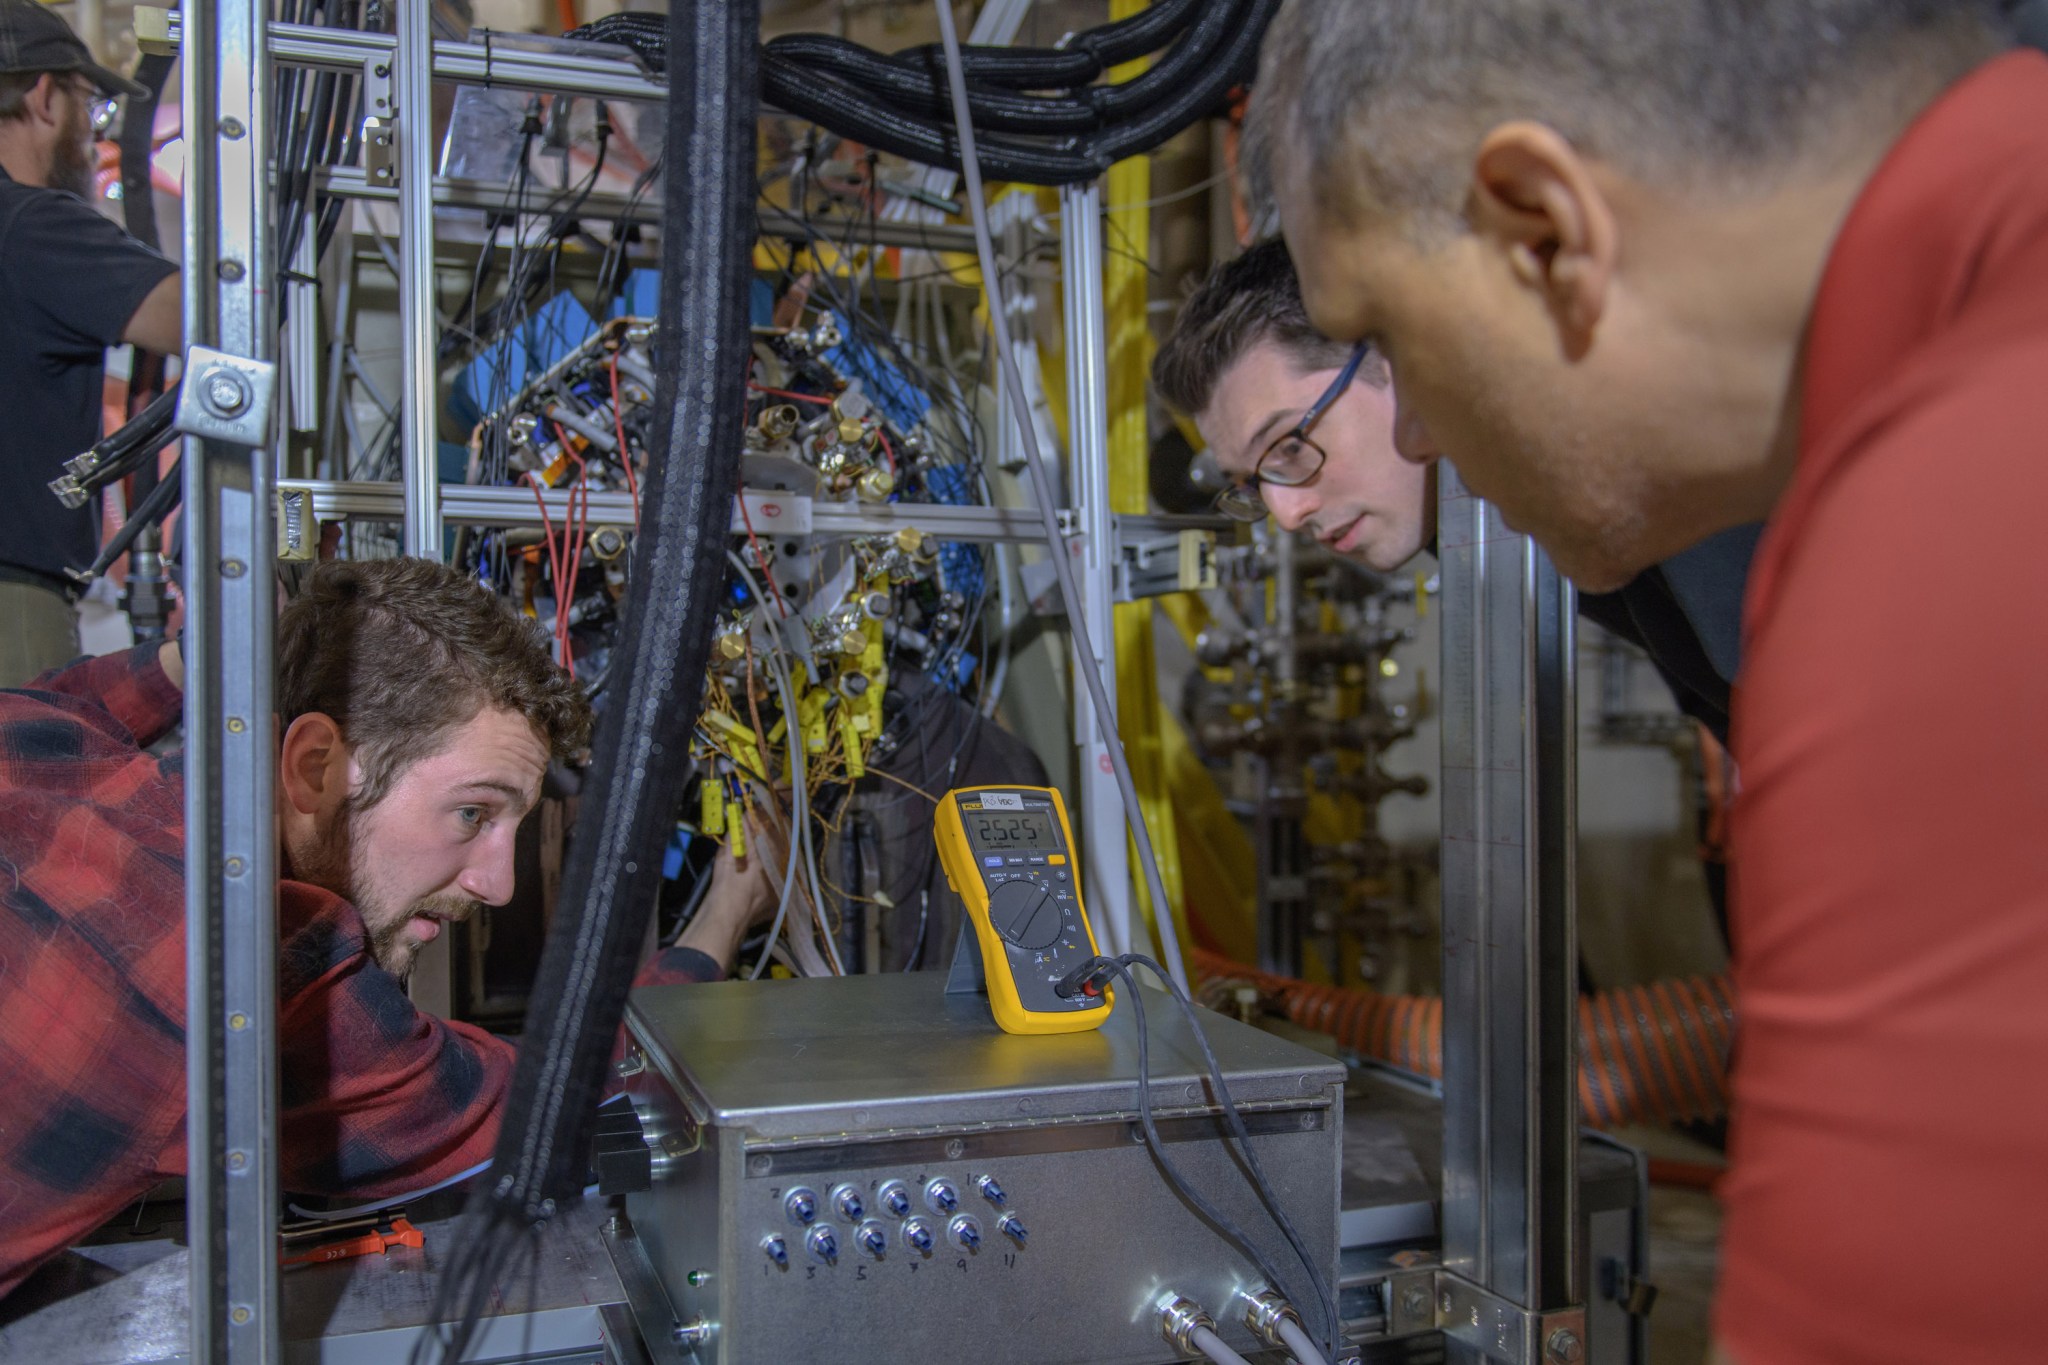 Ohio State Graduate Research Assistant Alec Schnabel (left), University of Wisconsin doctoral candidate James Swanke (center), and Ohio State Graduate Research Engineer Robert Borjas conduct tests on aircraft hardware at NEAT